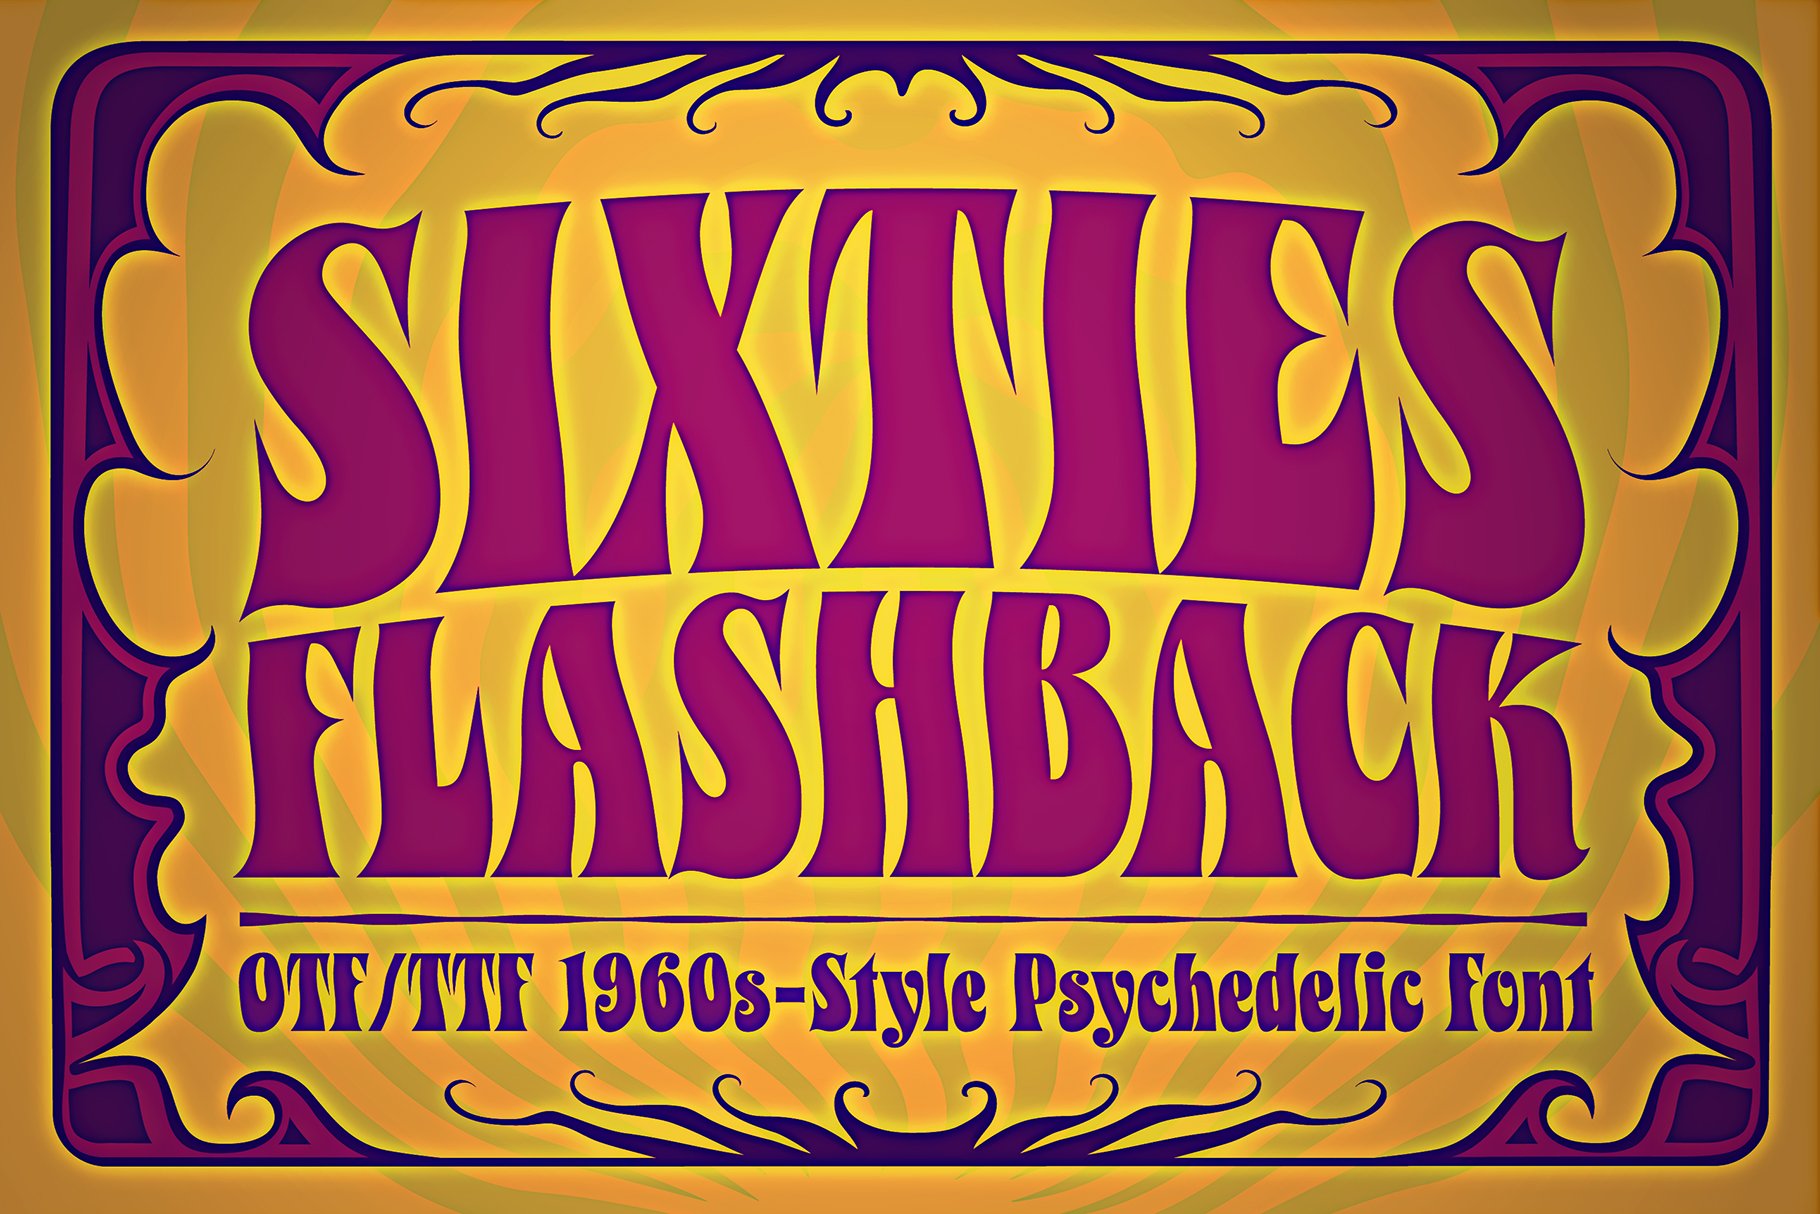 Sixties Flashback Psychedelic Font cover image.